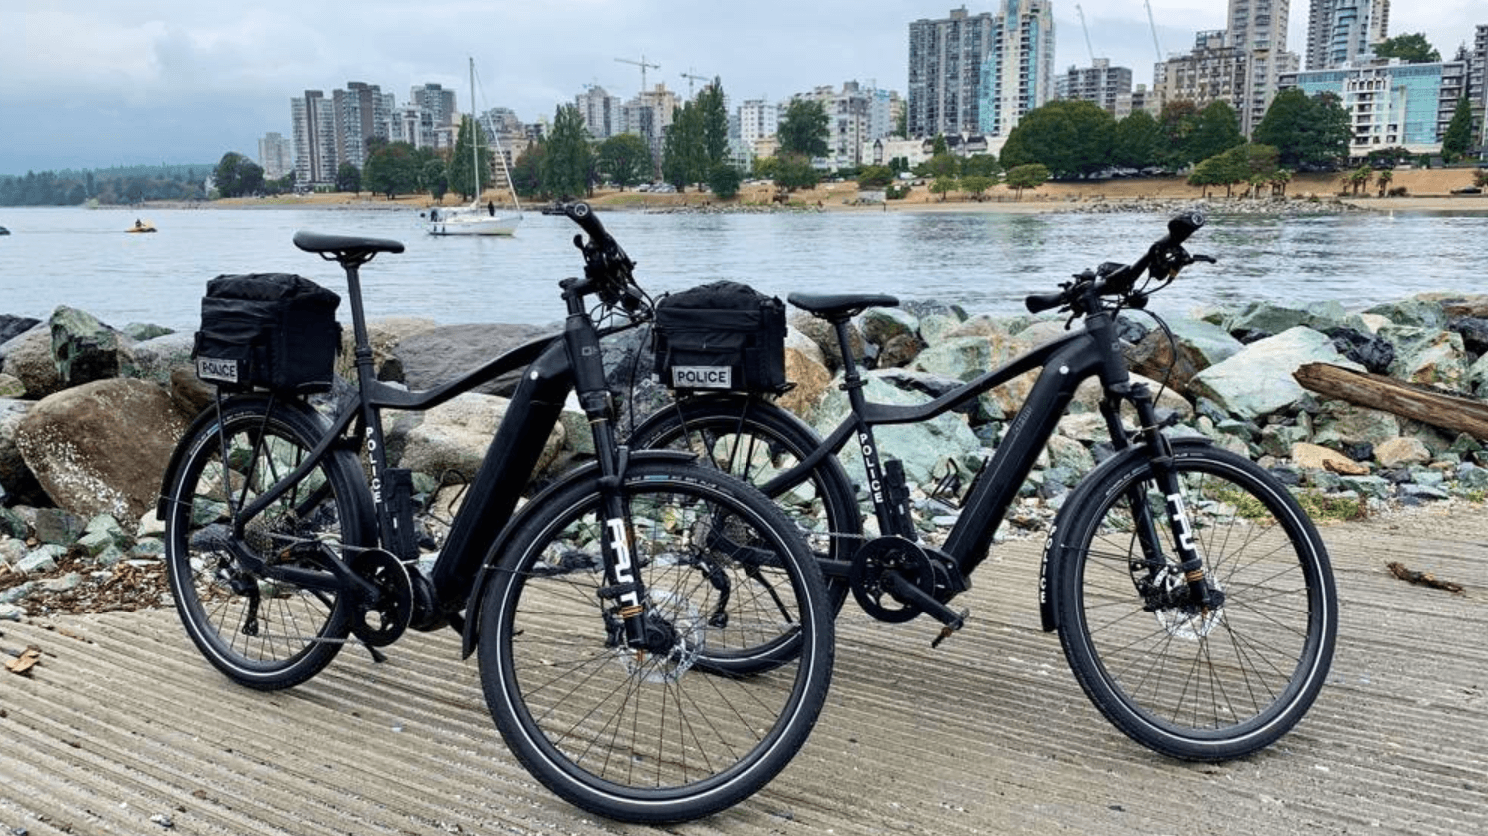 OHM Supplies Vancouver Police Department with E-Bikes for Pilot Project